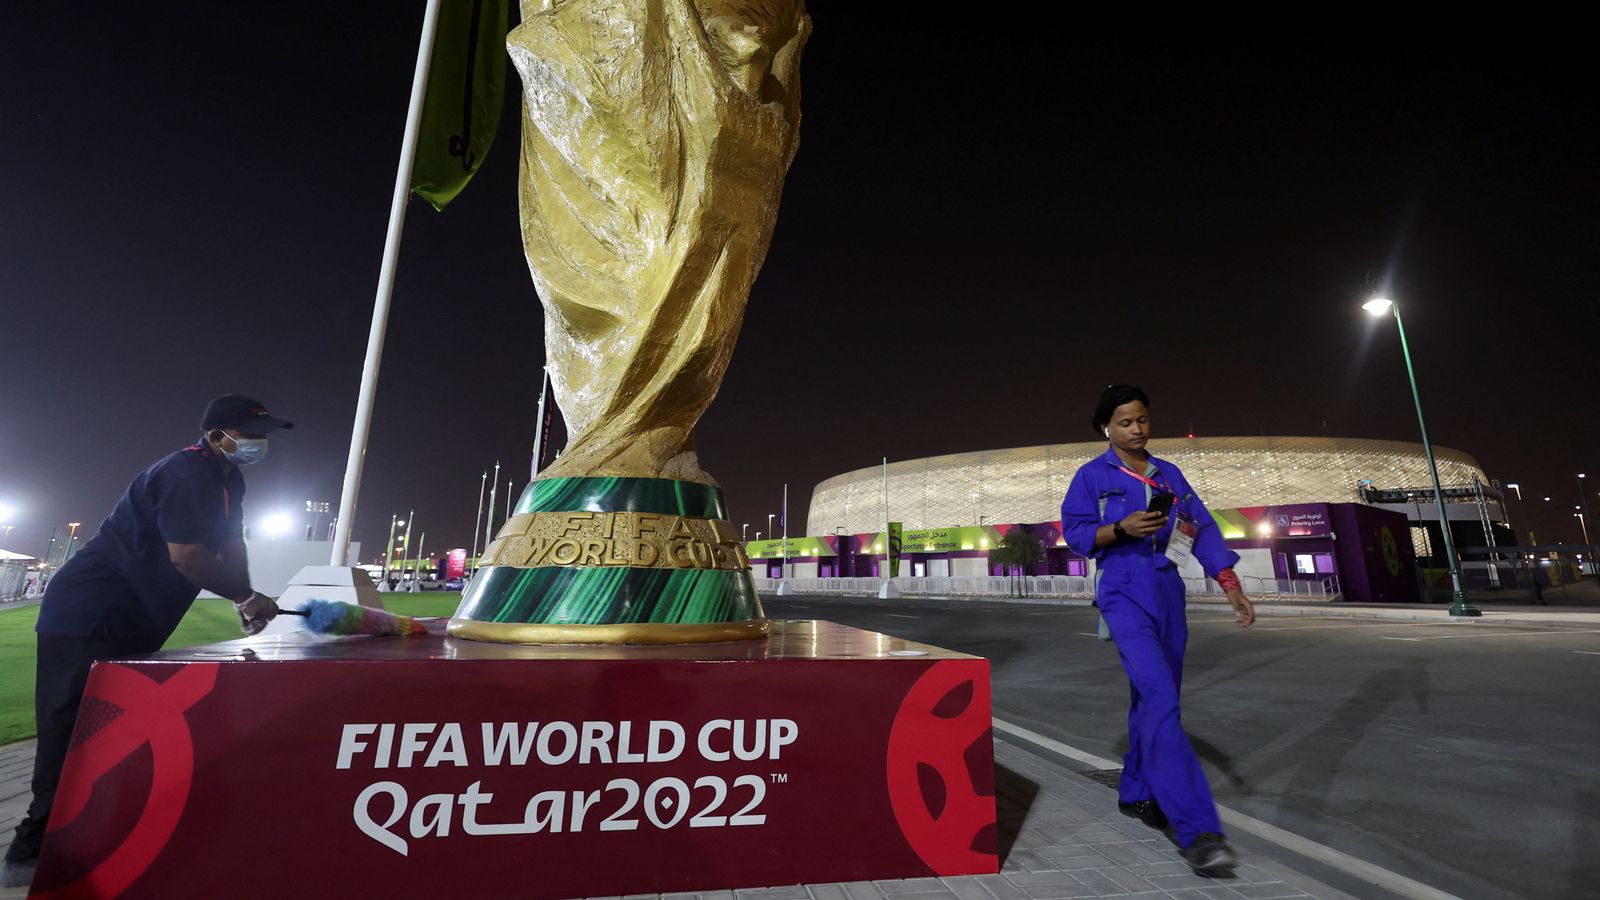 Foreign Secretary James Cleverly to attend World Cup - and says gay fans should not protest in Qatar